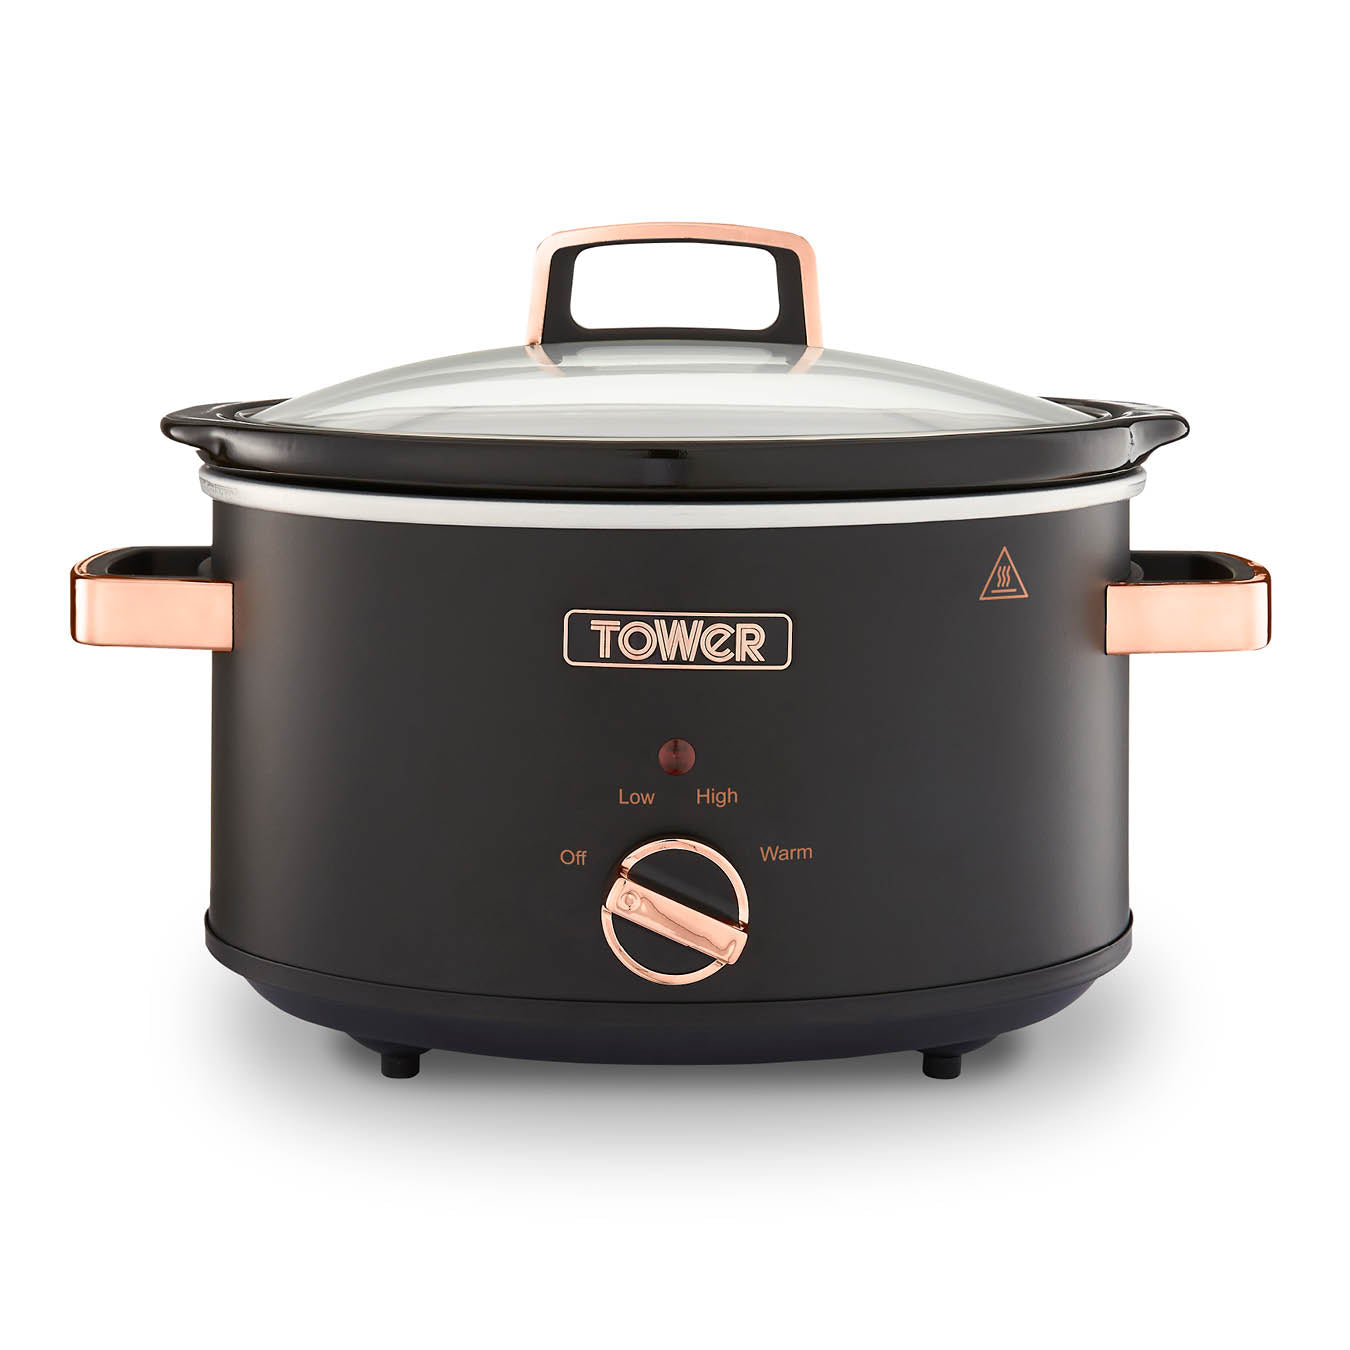 Tower Cavaletto 3.5 Litre Slow Cooker - Black